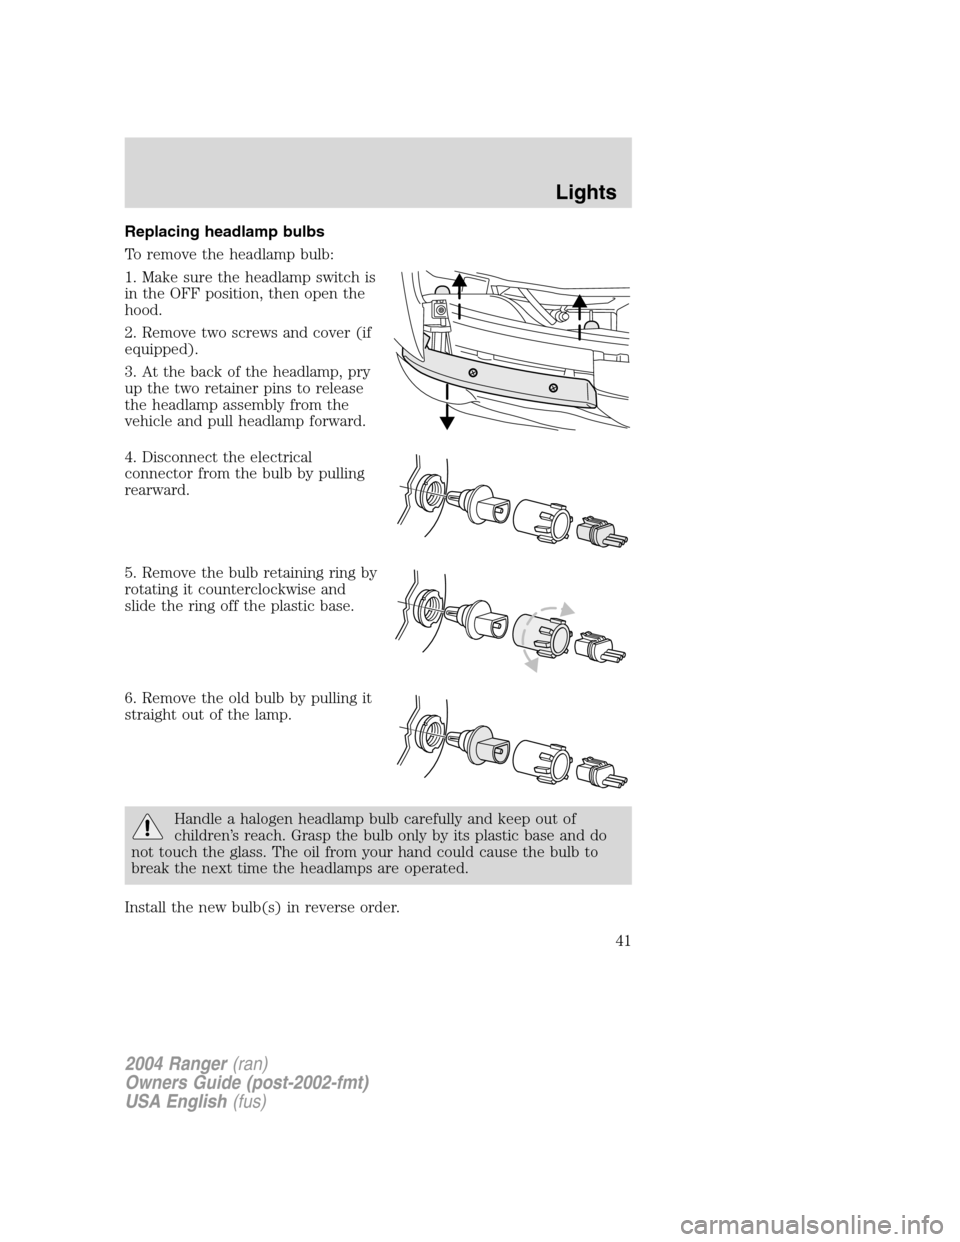 FORD RANGER 2004 2.G Owners Manual Replacing headlamp bulbs
To remove the headlamp bulb:
1. Make sure the headlamp switch is
in the OFF position, then open the
hood.
2. Remove two screws and cover (if
equipped).
3. At the back of the h